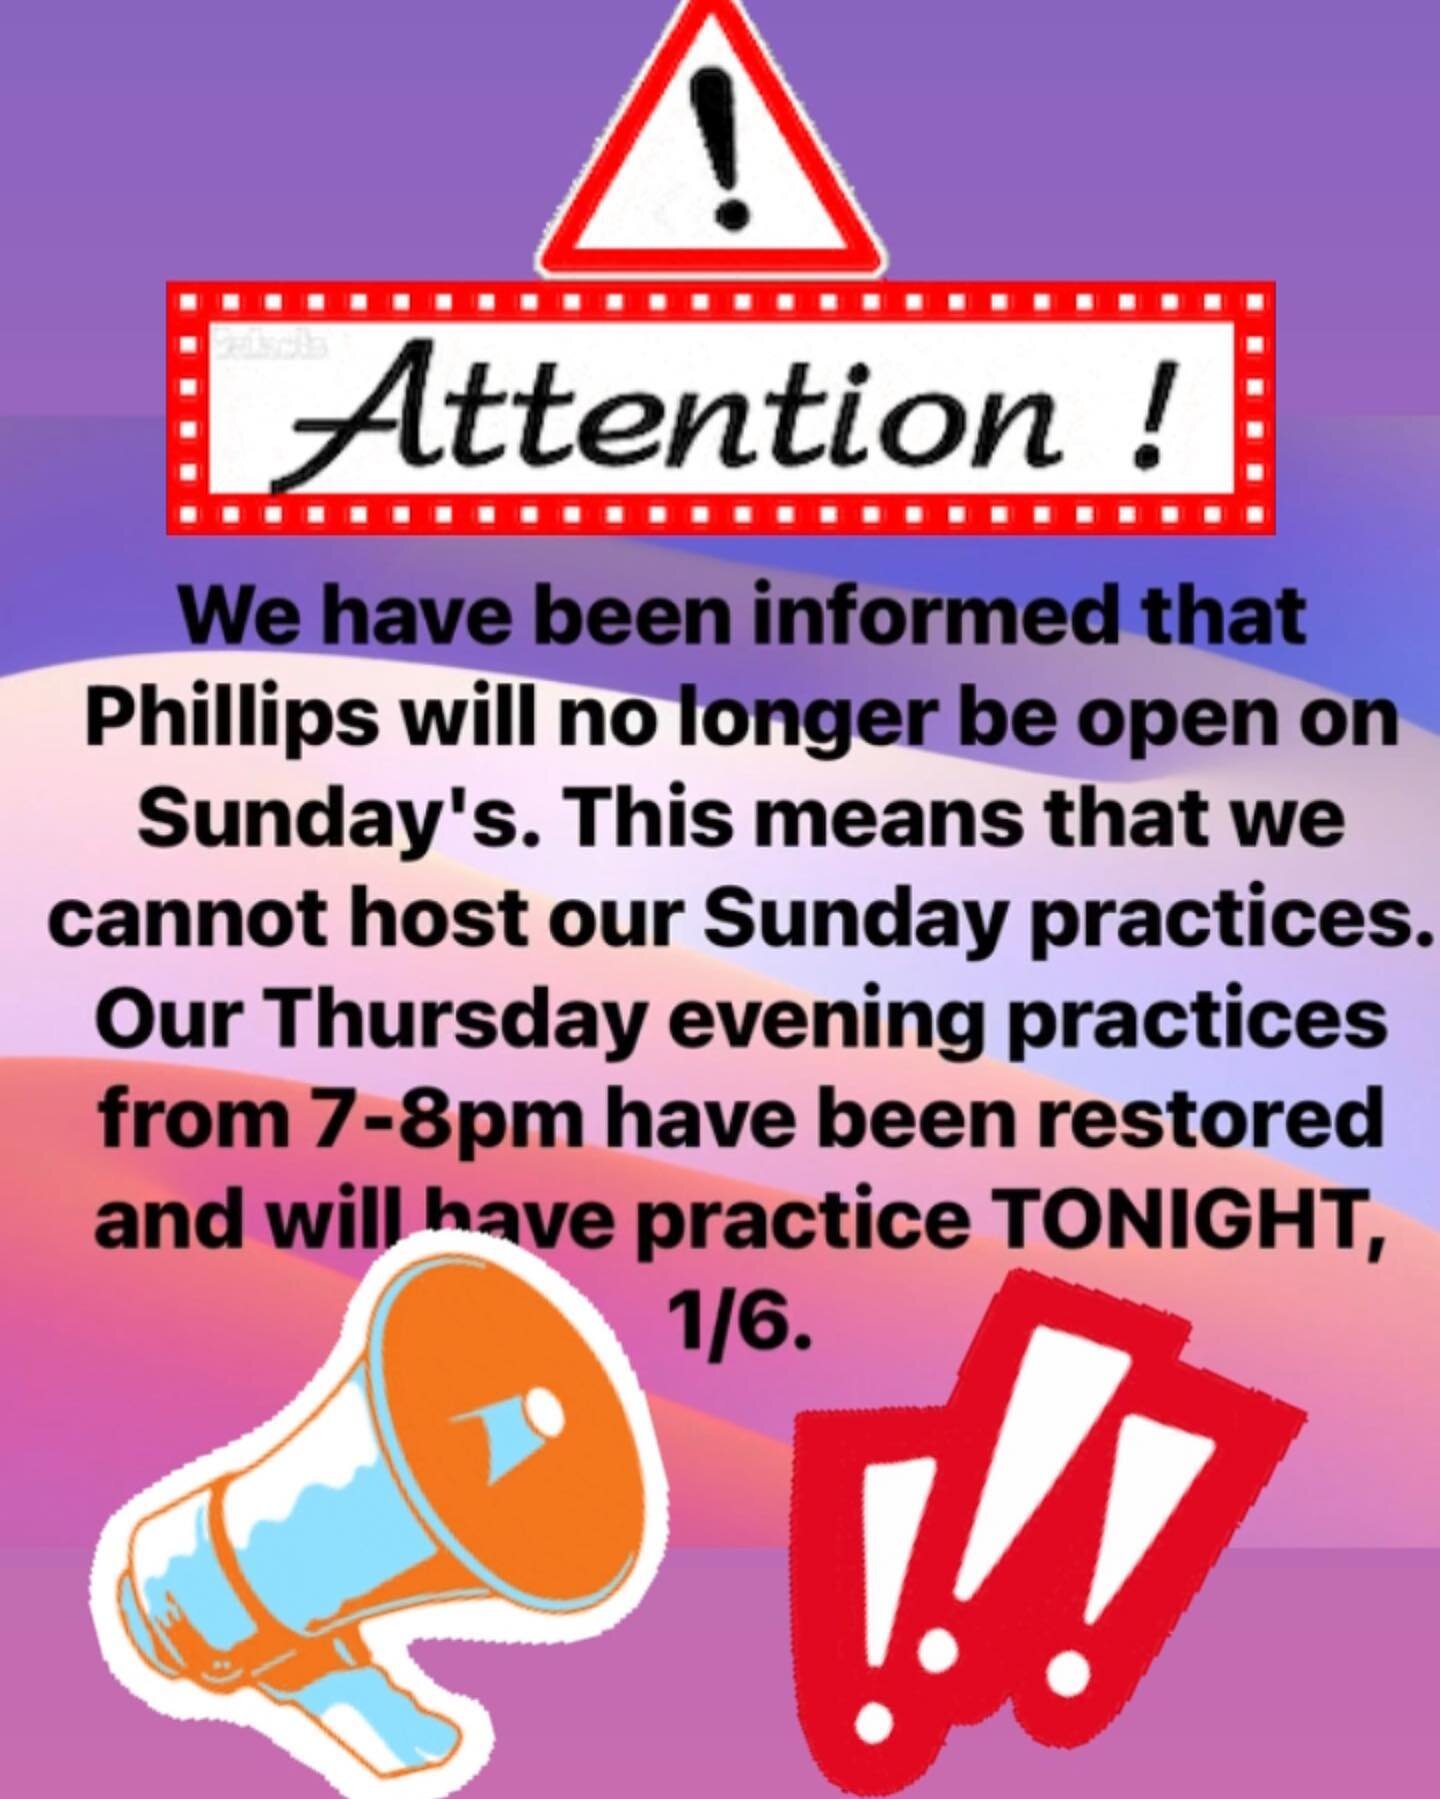 Unfortunately, Phillips will no longer be open on Sunday's. This means that we cannot host our Sunday practices. THERE WILL BE NO PRACTICE ON 1/9/2022. This news is very sad for us, as we have long wanted to have Sunday practices.

On the flip side, 